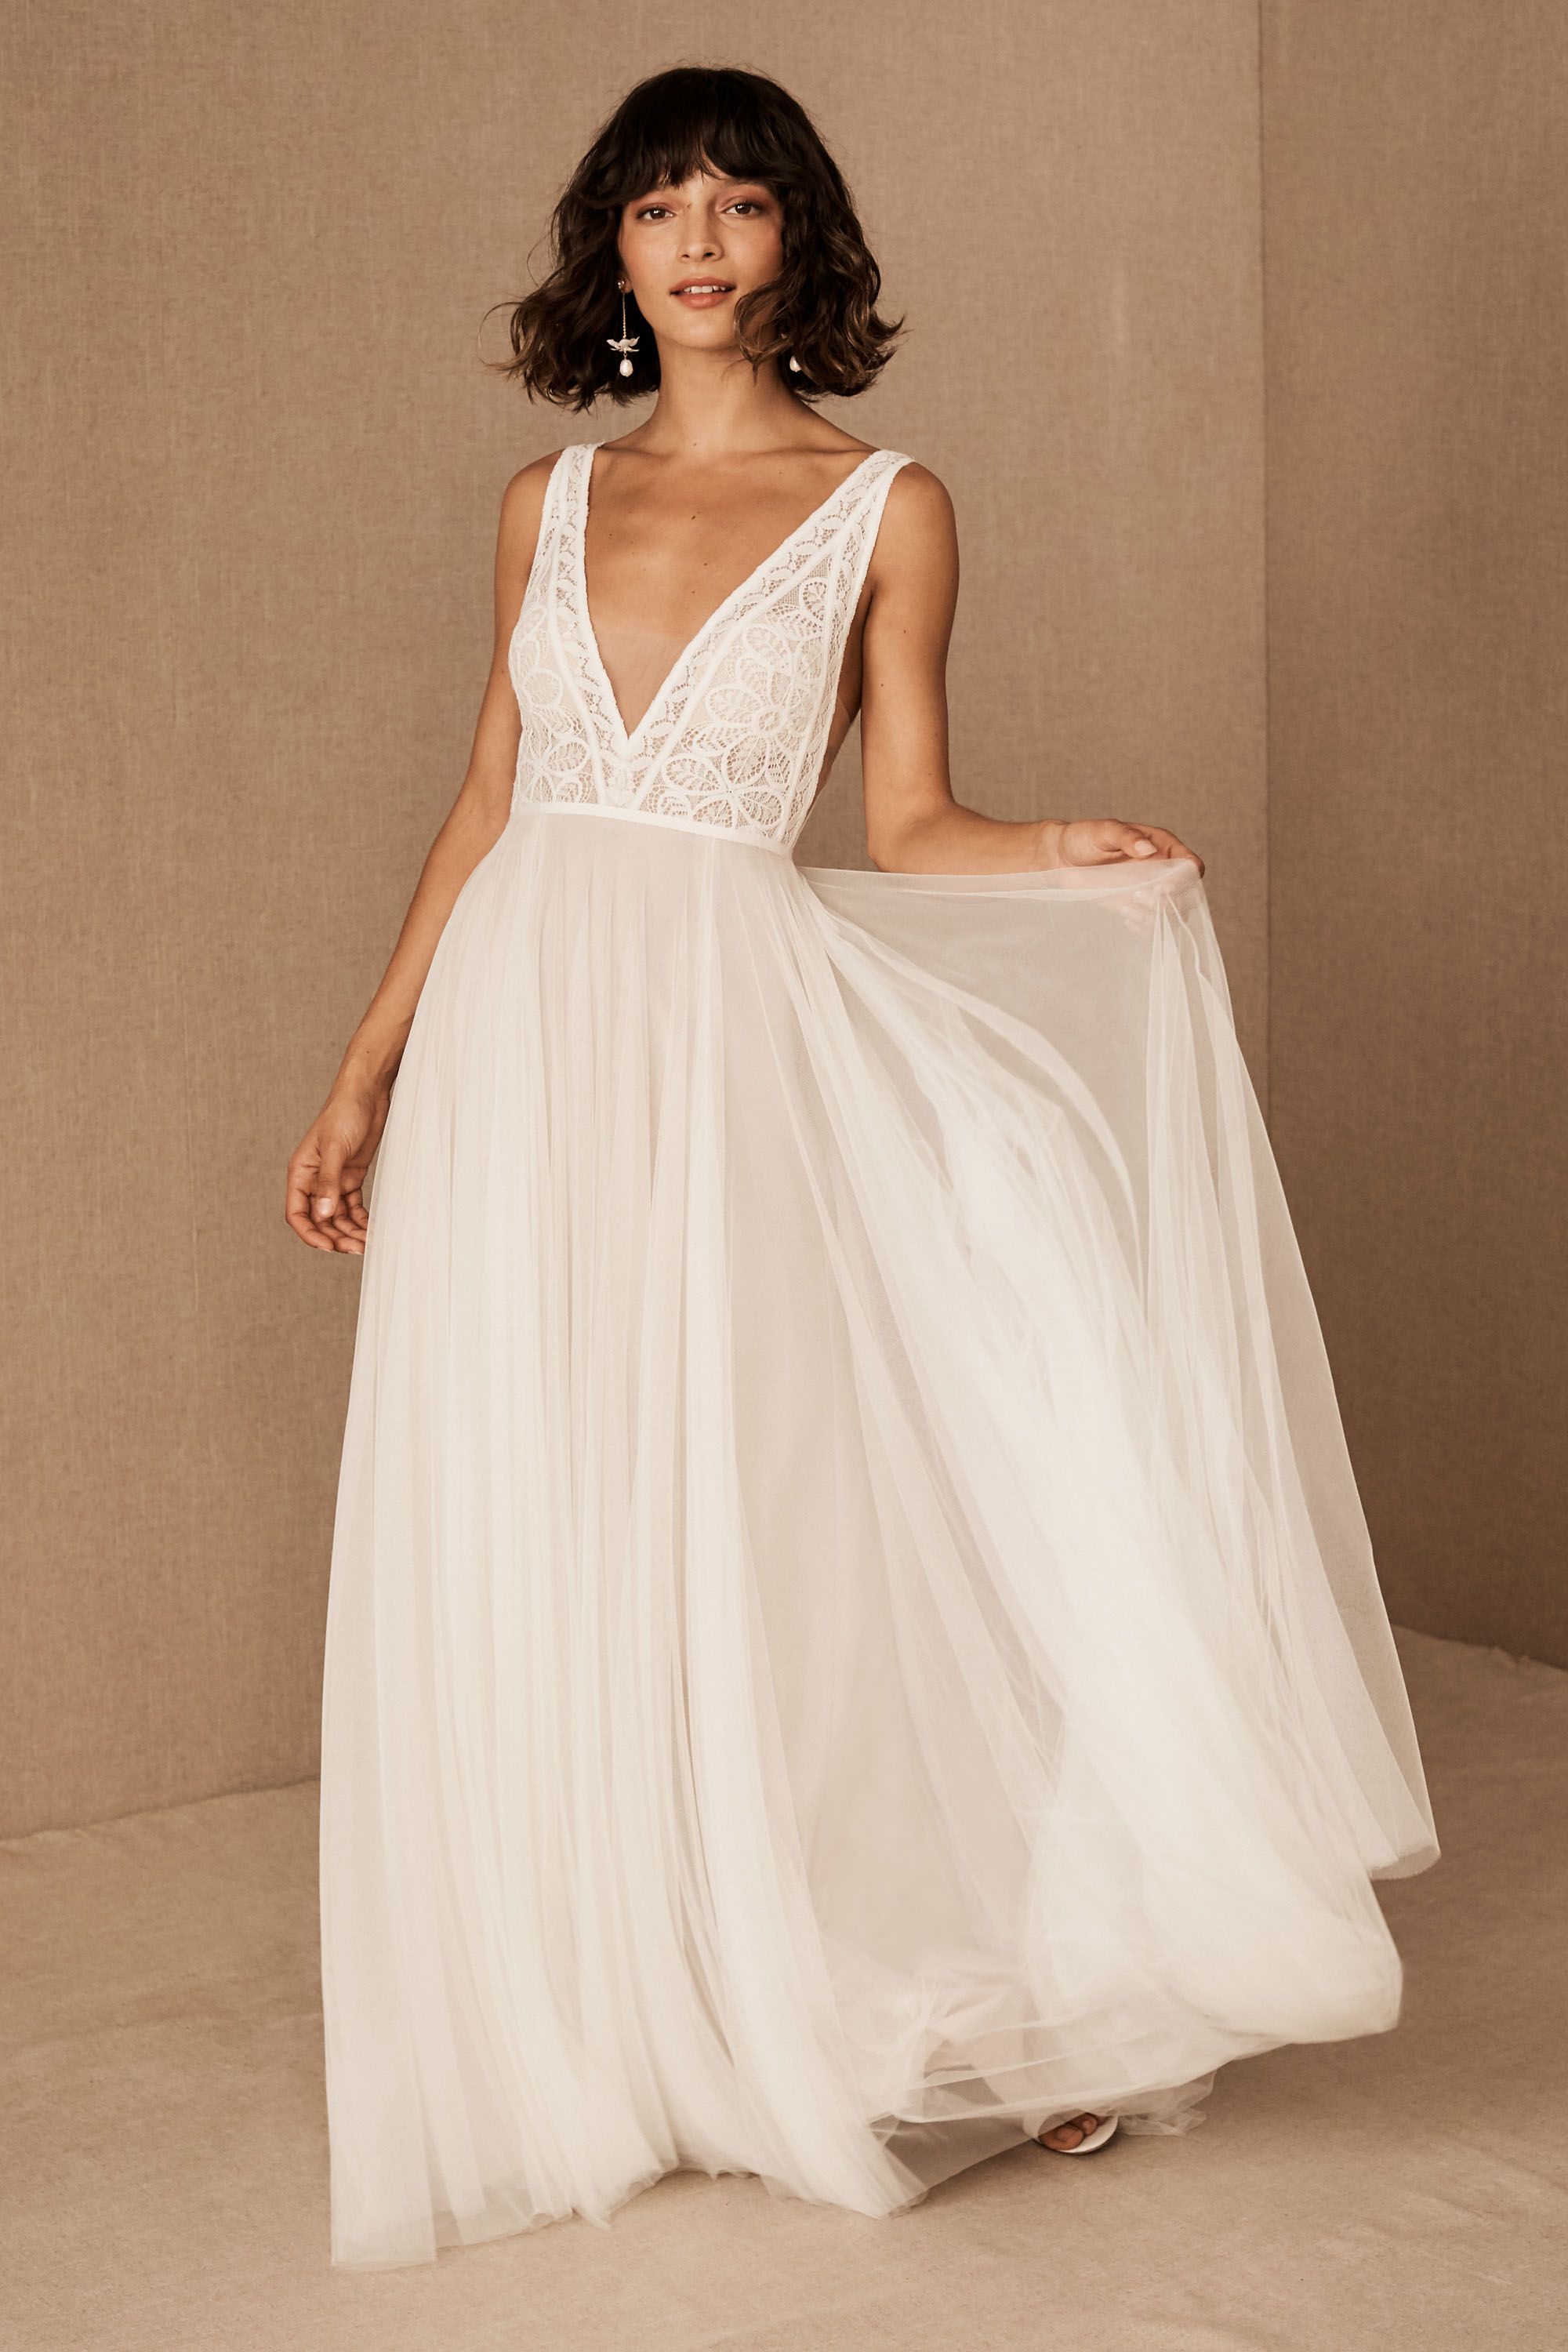 wedding gown online shopping